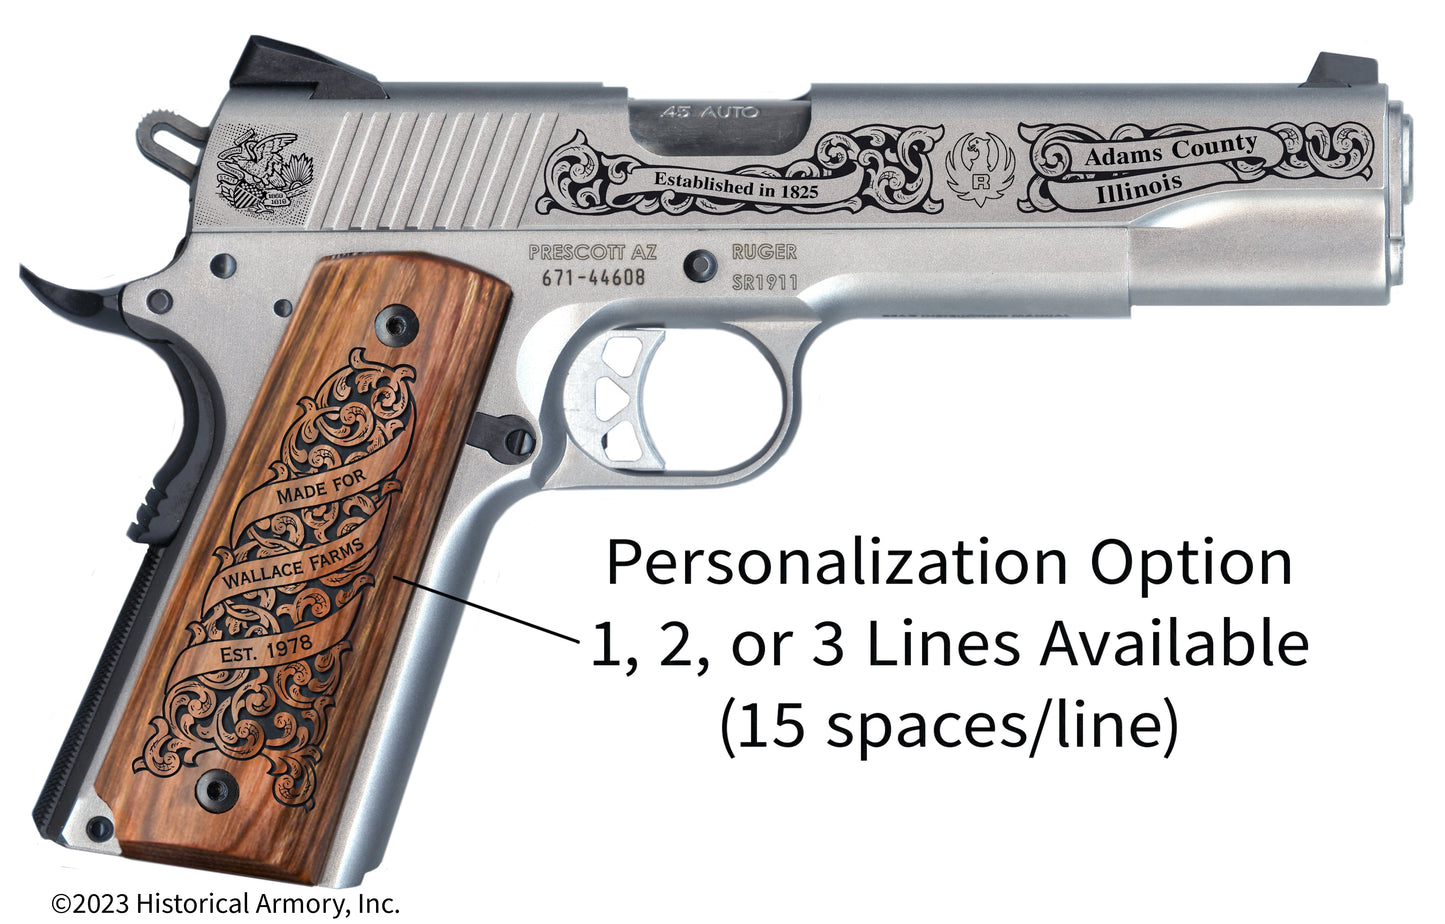 Adams County Illinois Personalized Engraved .45 Auto Ruger 1911